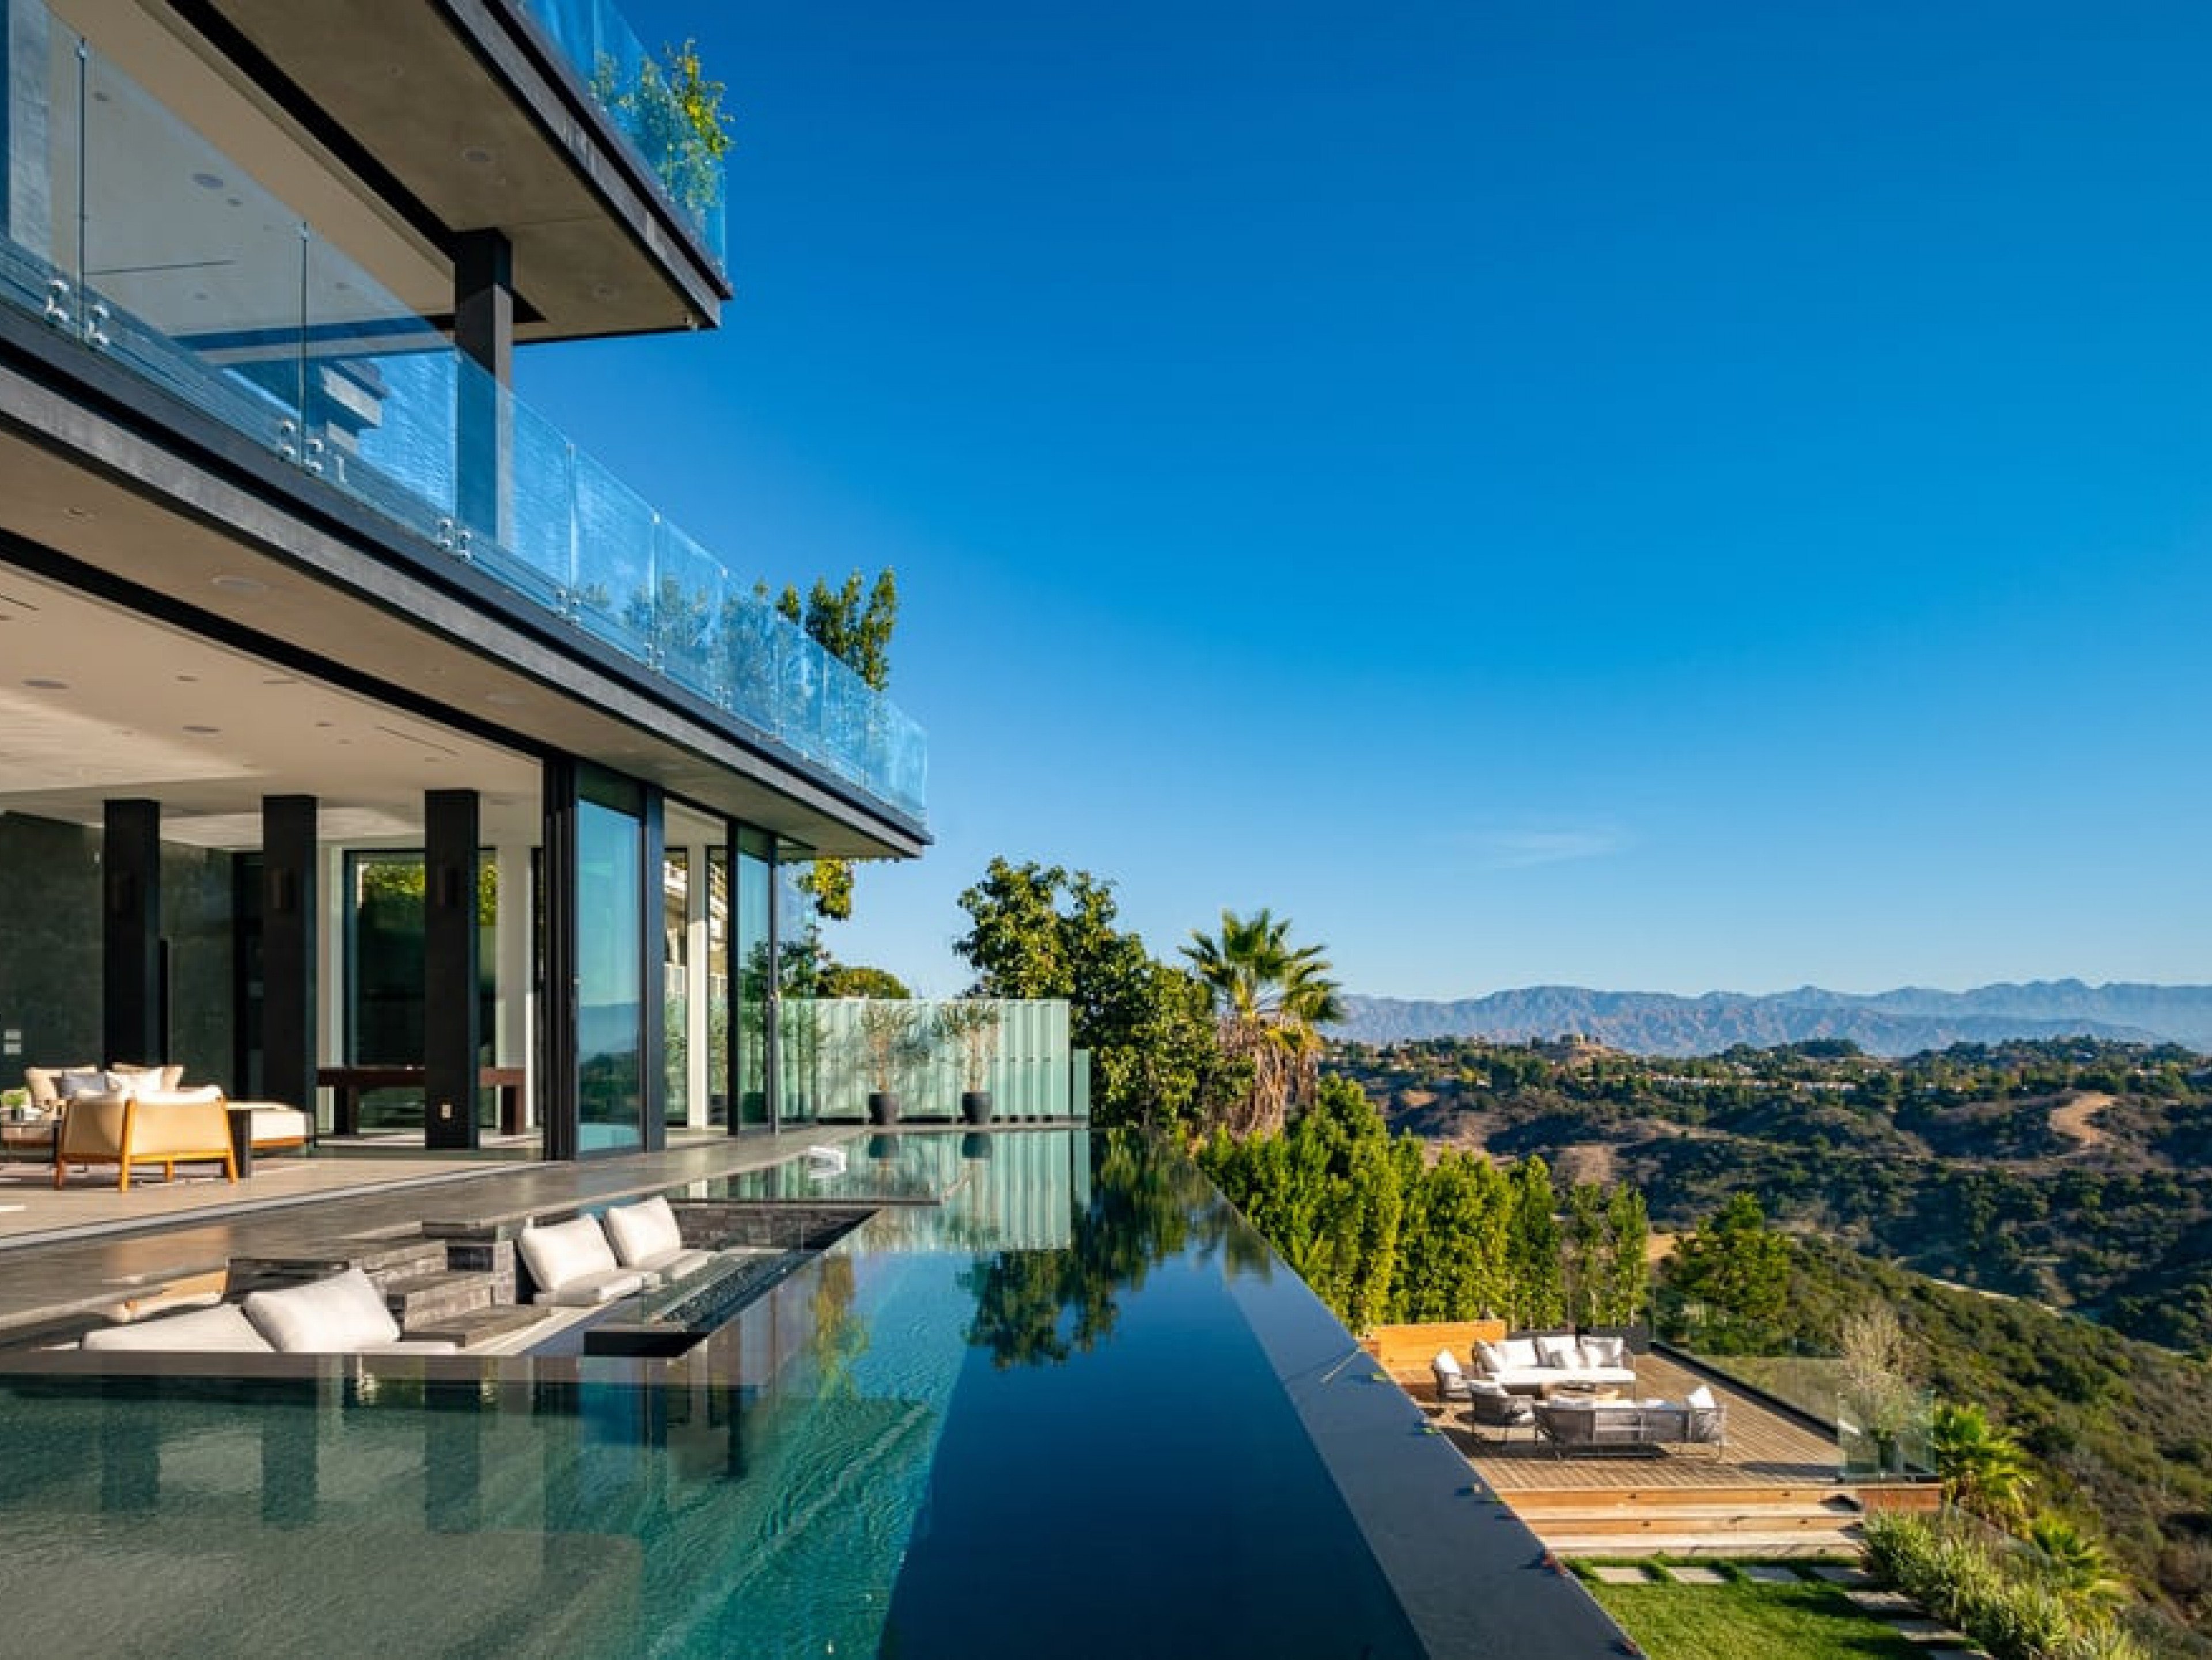 Los Angeles 163 - villas with private pools for Spring Break